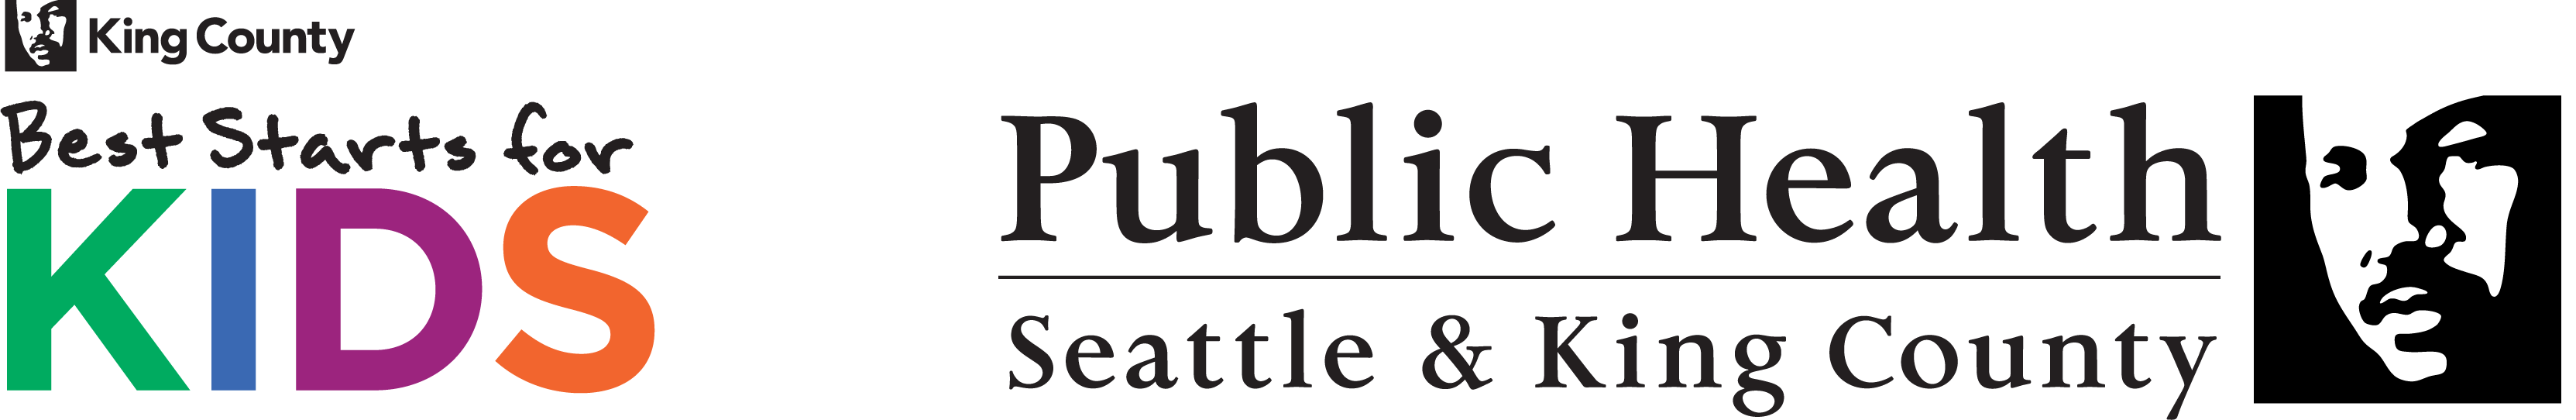 King County Best Starts for Kids and Public Health logos used for partnership projects